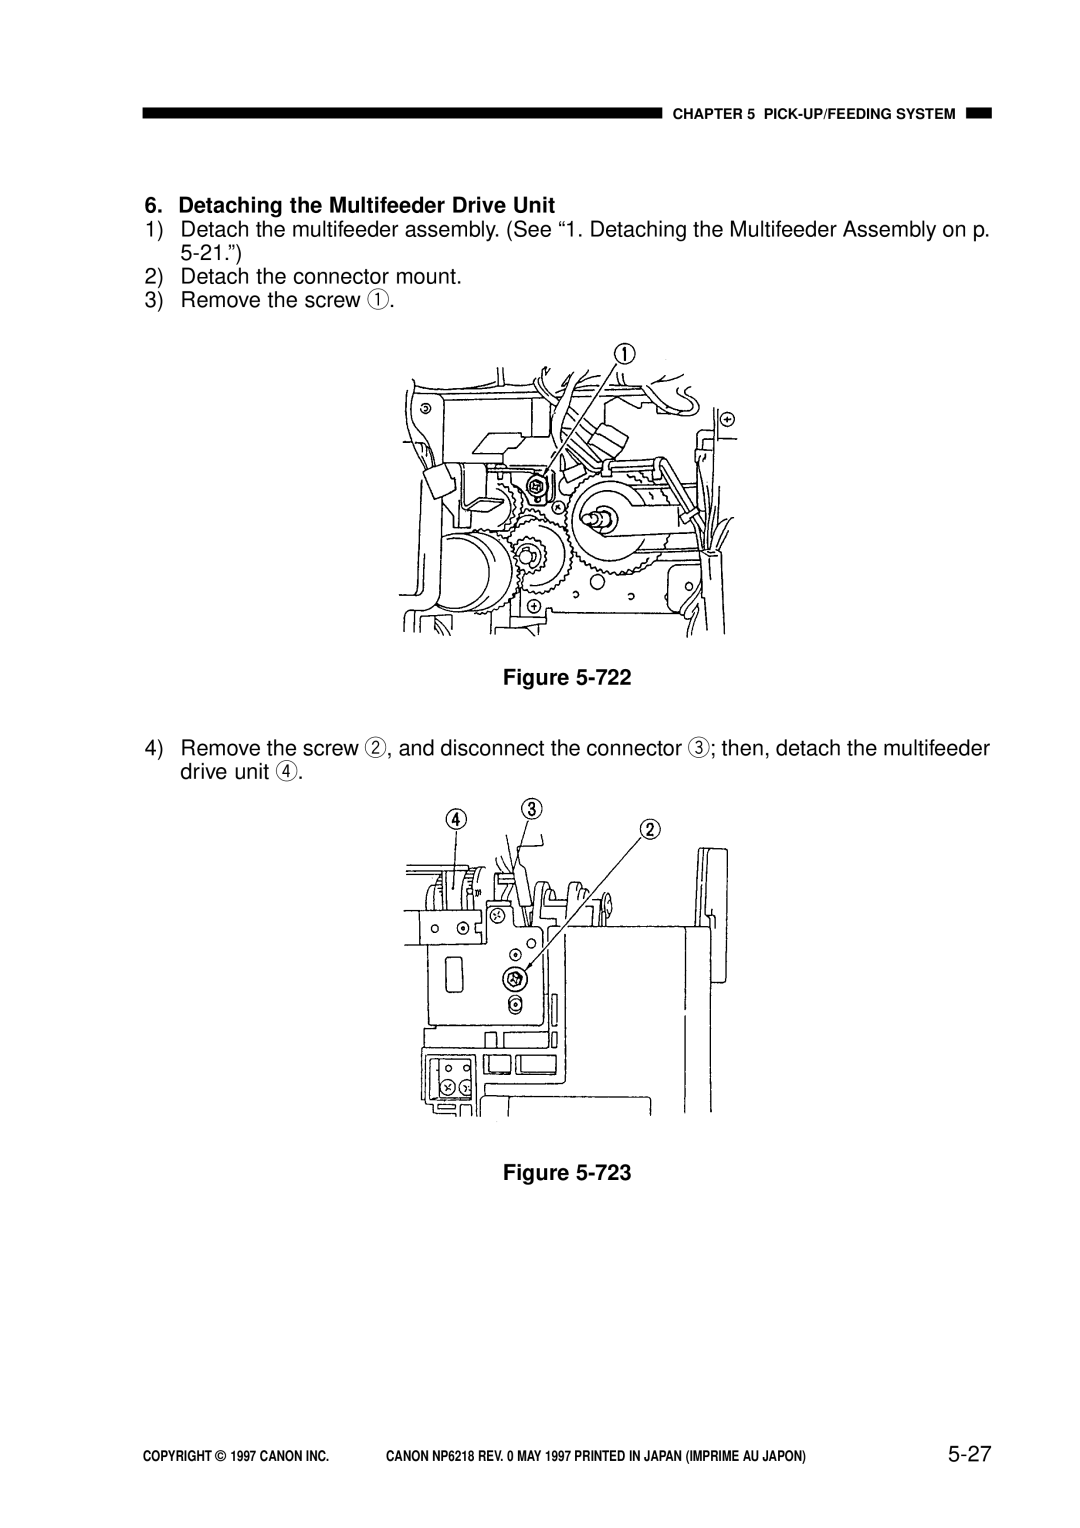 Canon NP6218, FY8-13EX-000 service manual Detaching the Multifeeder Drive Unit, 5-27 